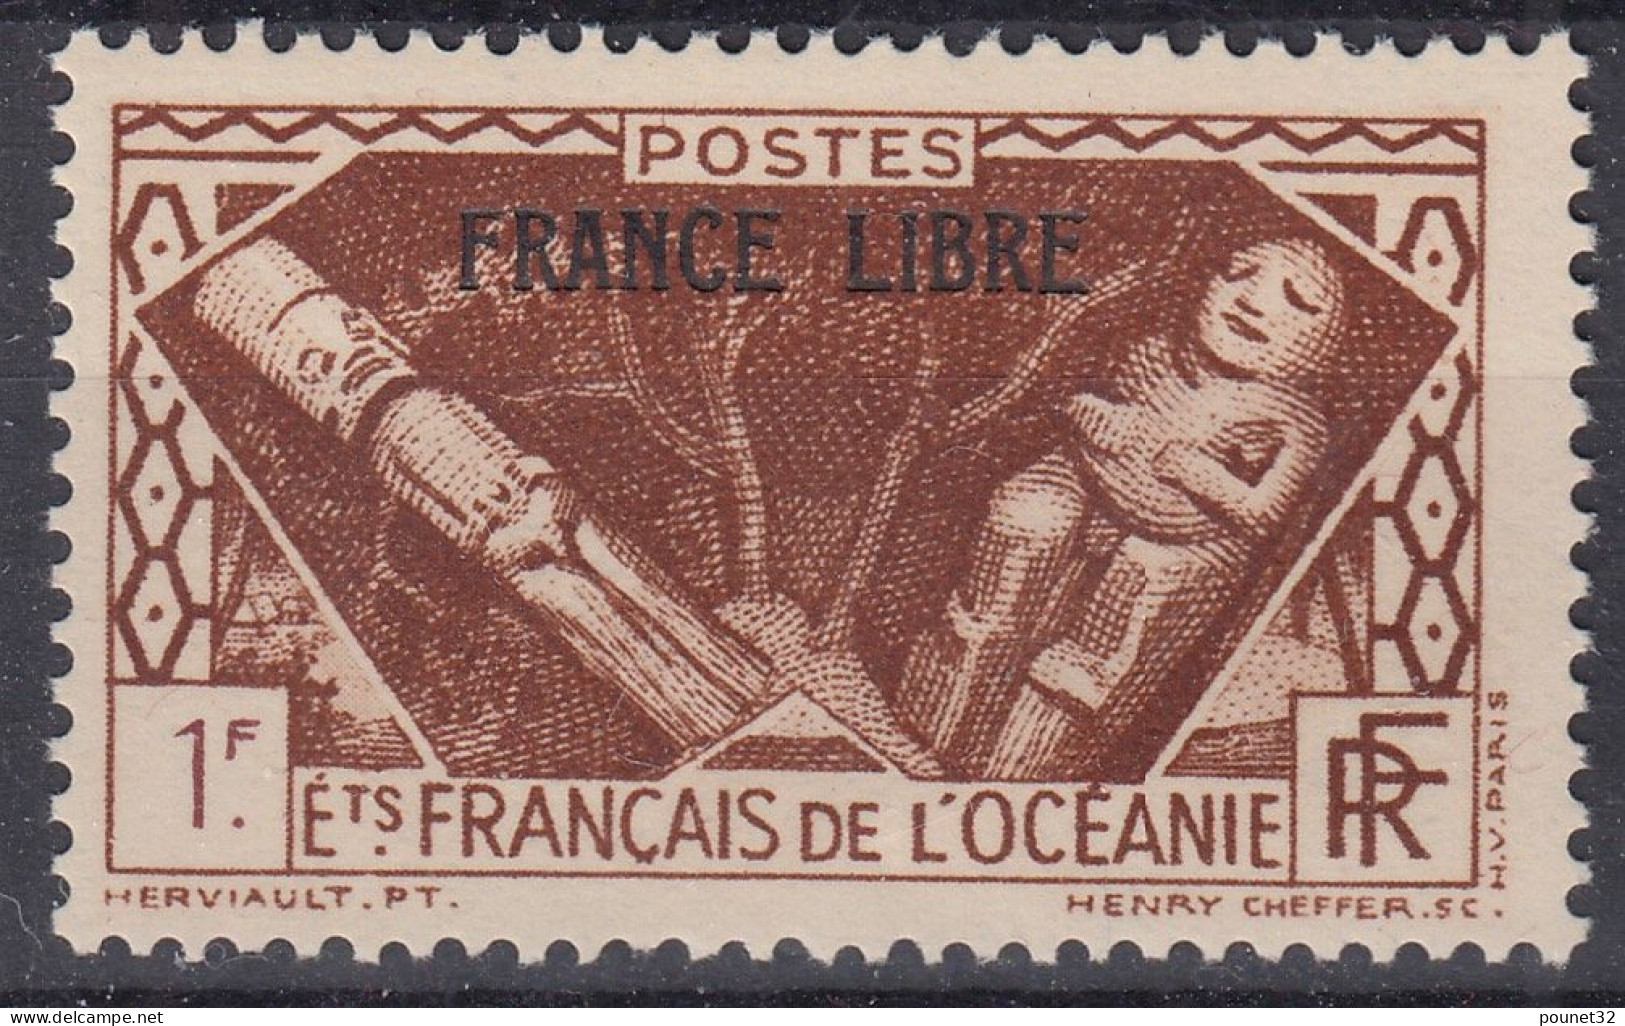 TIMBRE OCEANIE FRANCE LIBRE N° 144 NEUF GOMME COLONIALE SANS CHARNIERE - Ongebruikt